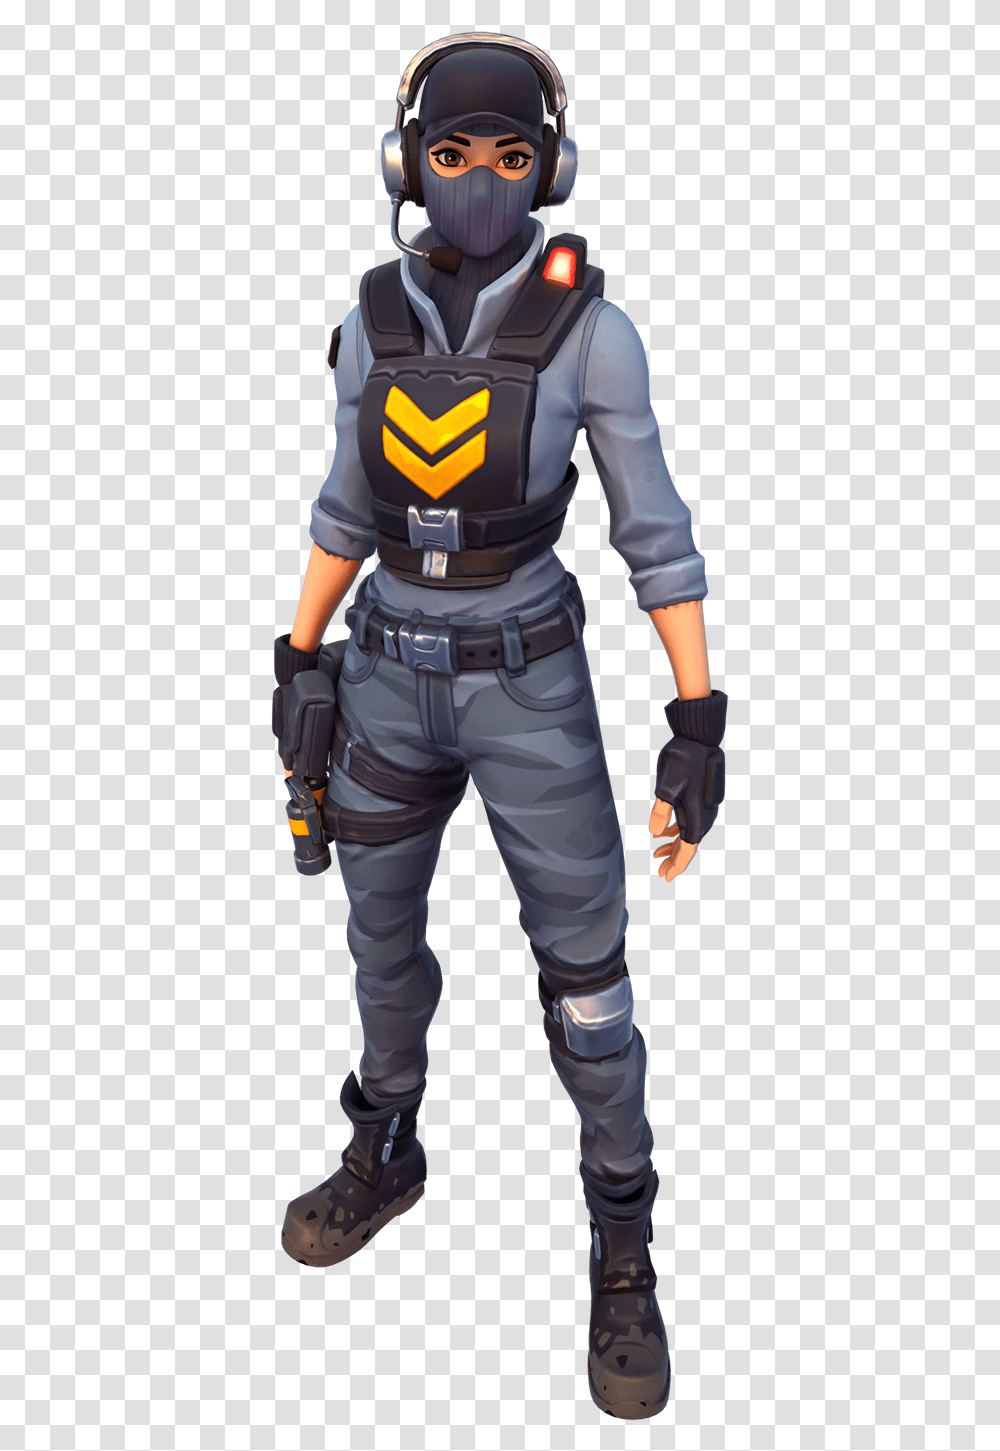 Waypoint Outfit Fnbr Co Fortnite Cosmetics Waypoint Fortnite Skin, Person, People, Helmet Transparent Png